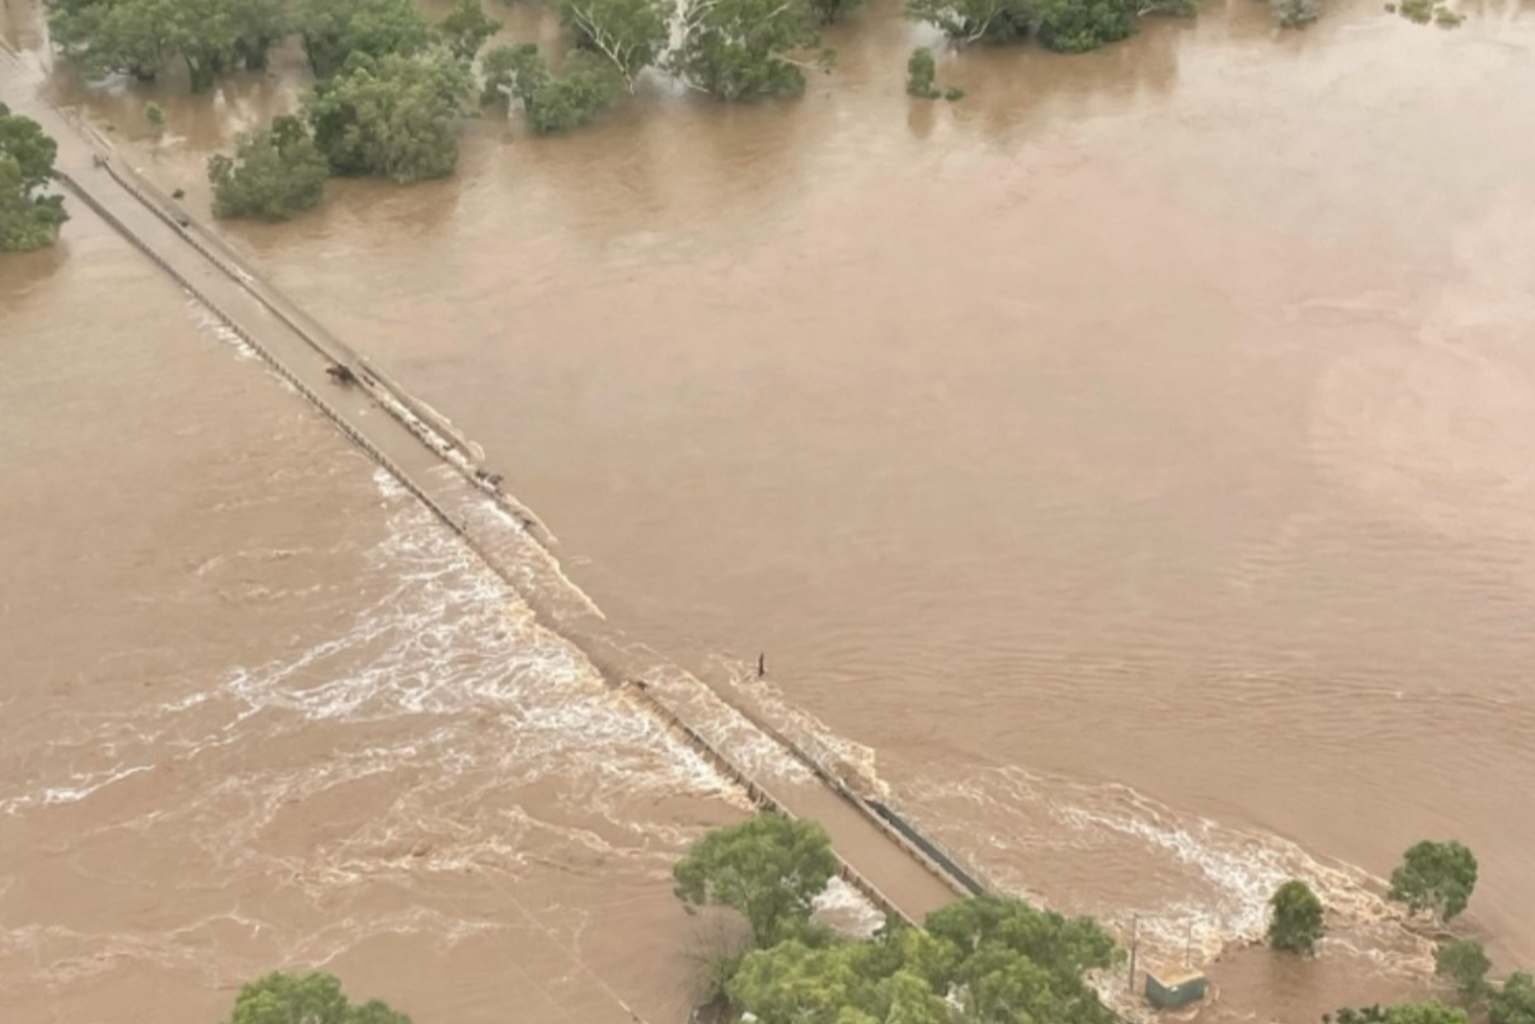 The bridge at Fitzroy Crossing has been flooded :